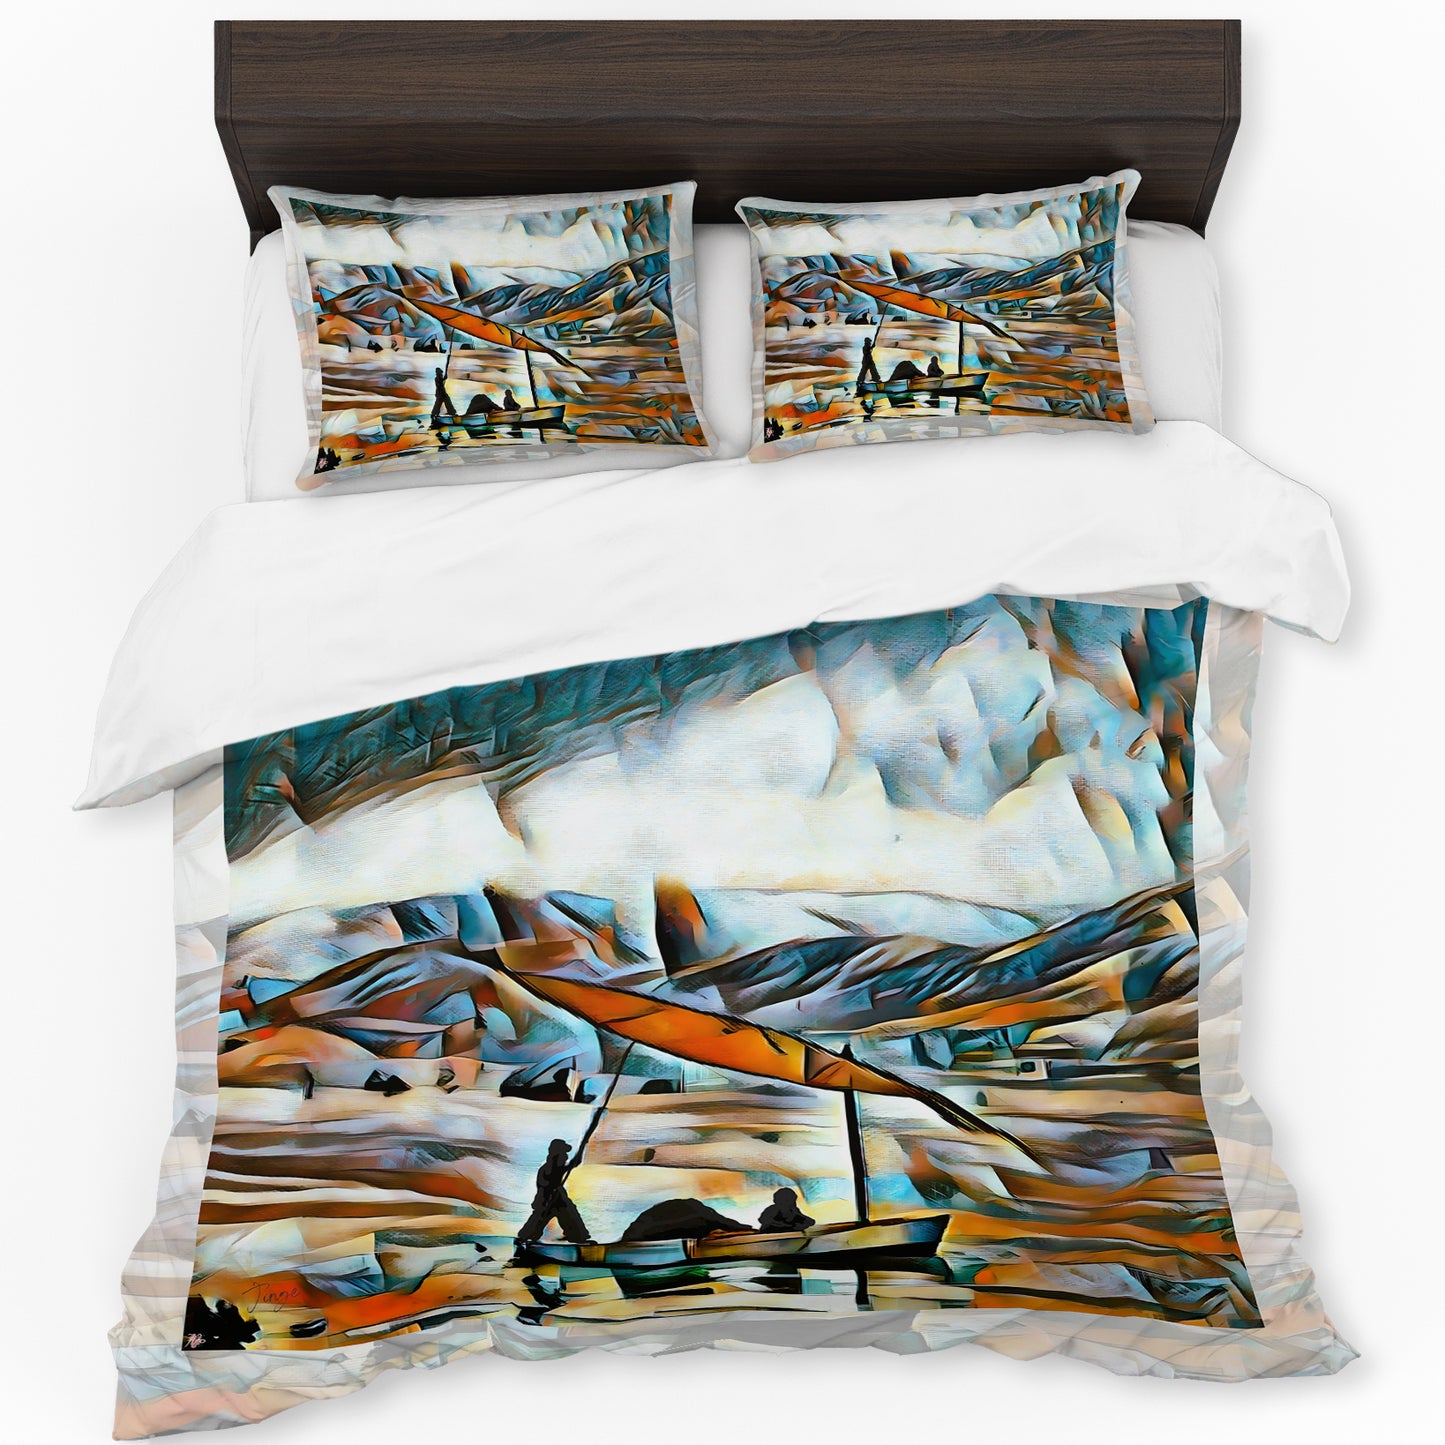 Reflecting Duvet Cover Set By Jinge for Fifo